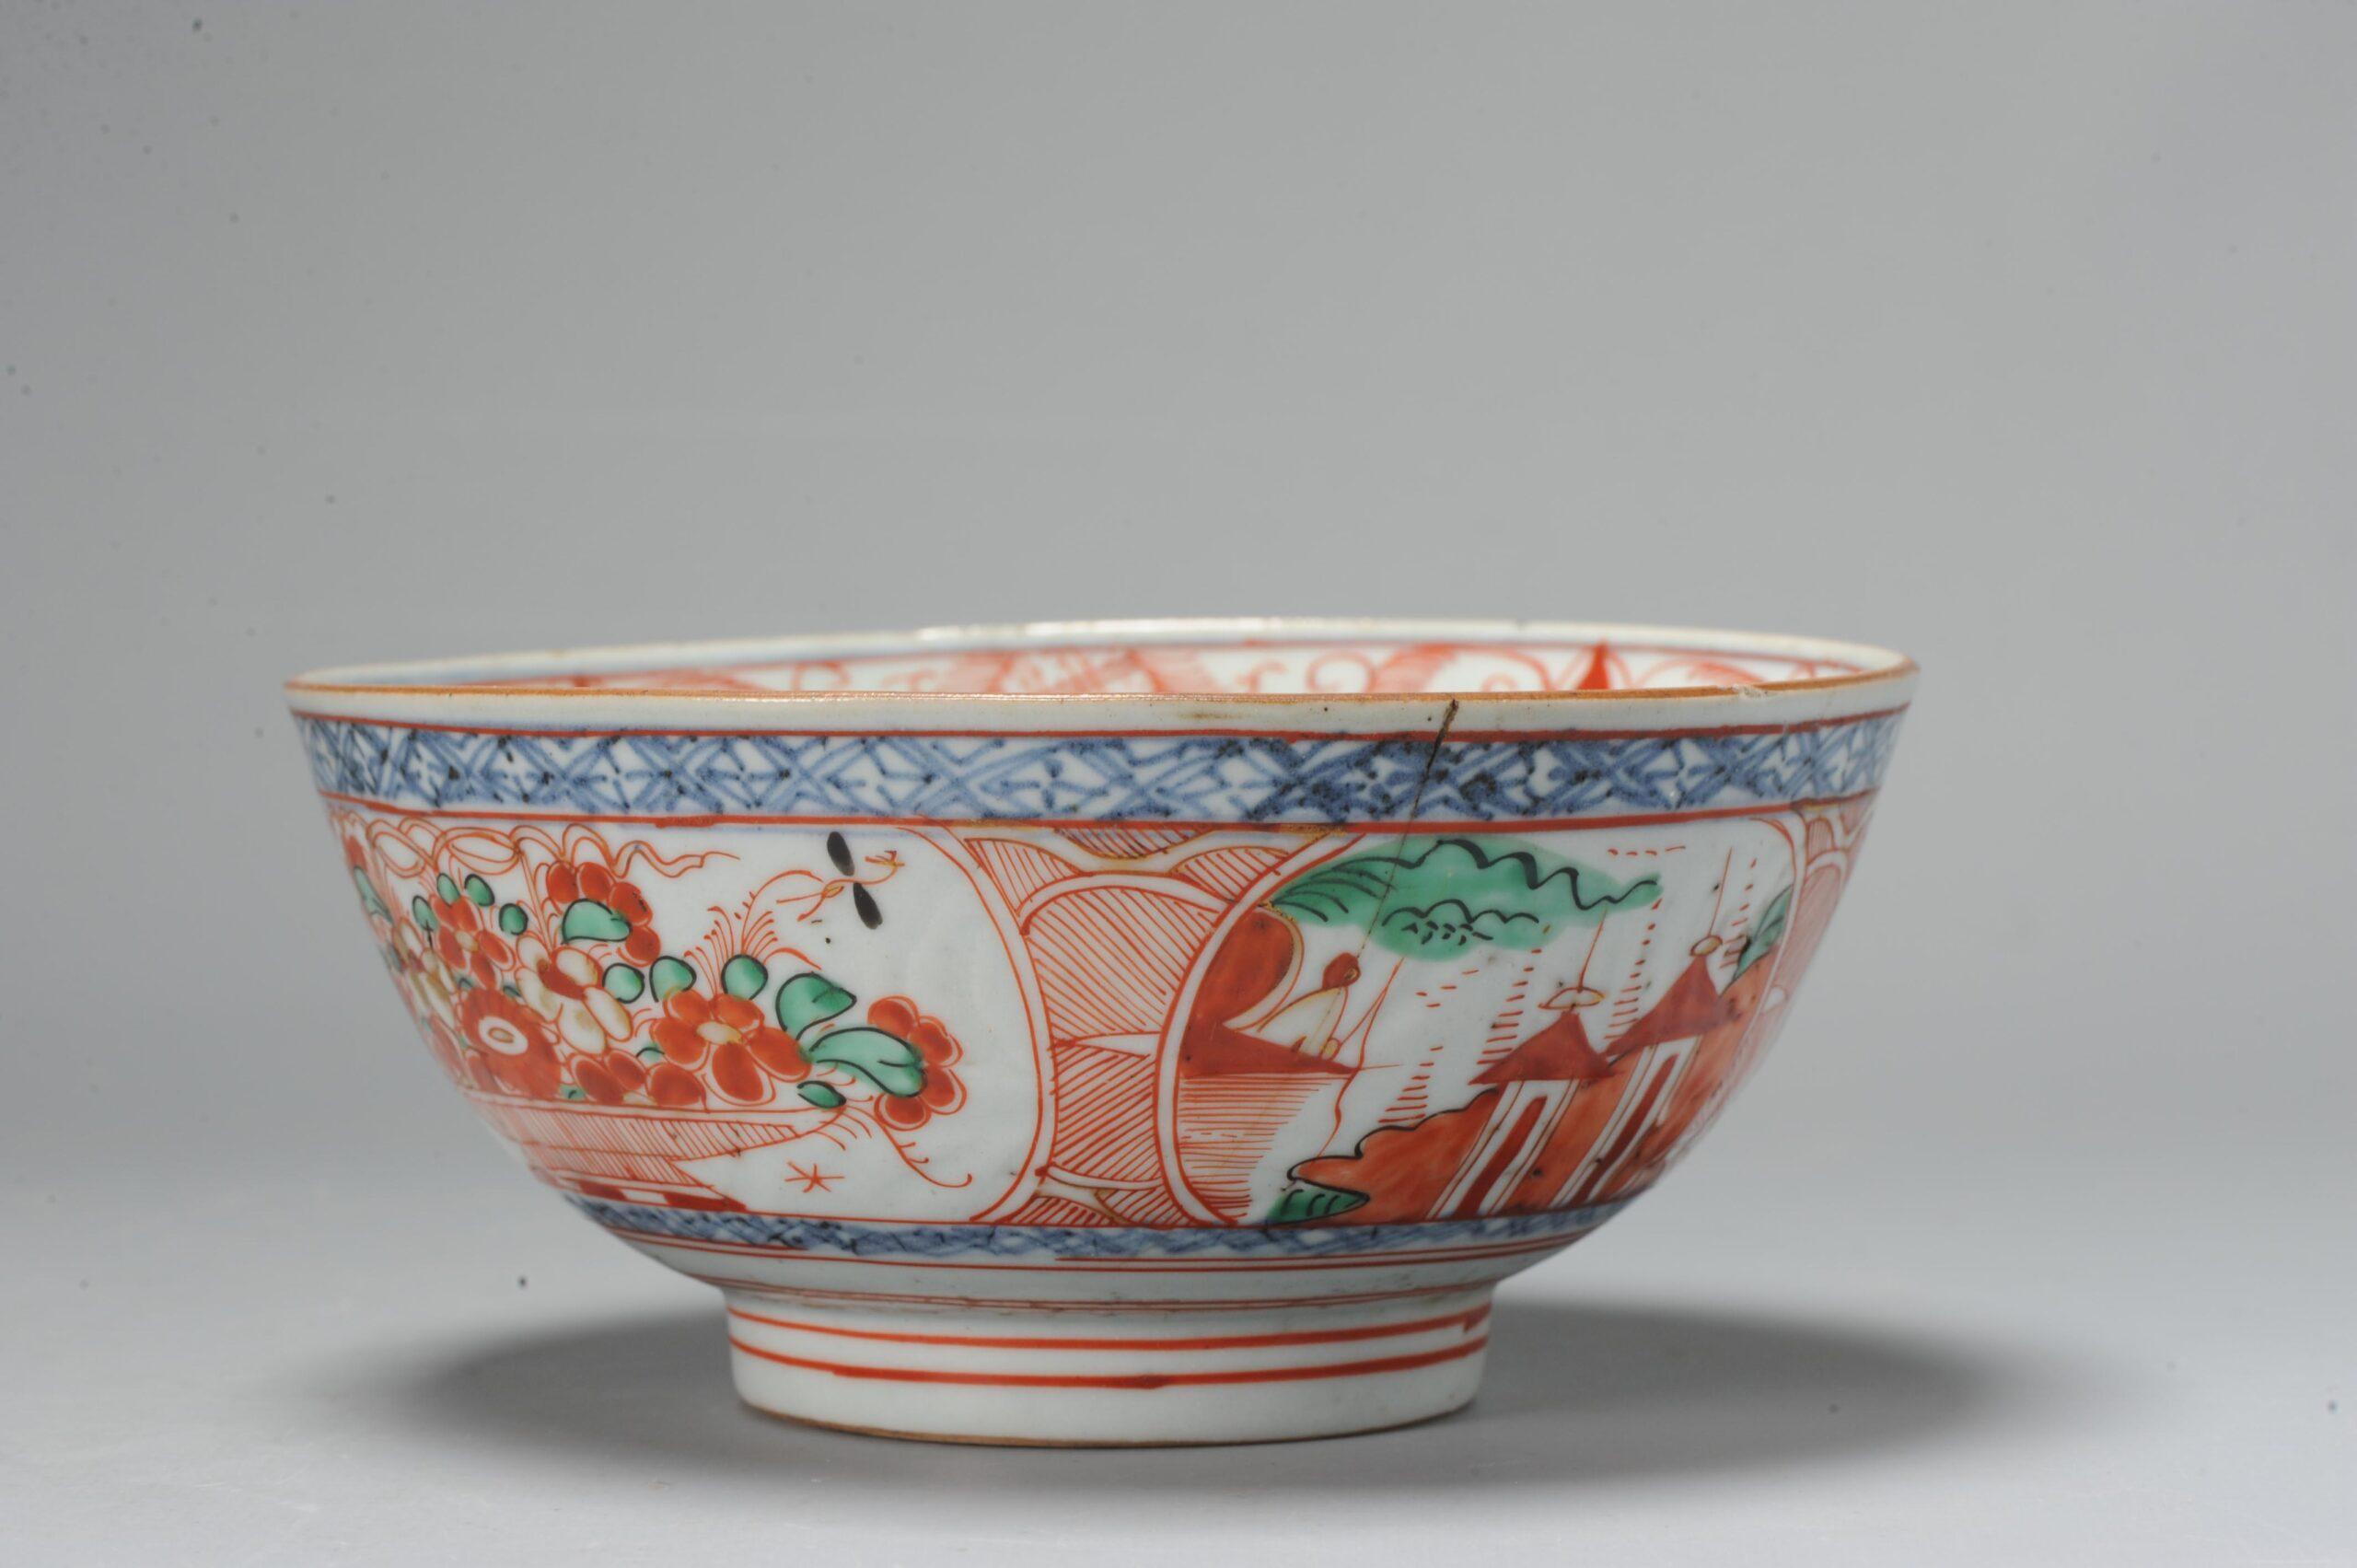 A very nicely made 18th century Kangxi Amsterdam Bont porcelain bowl.

We take a look at Amsterdams Bont porcelain from China. A relatively unknown niche of Chinese porcelain from ca 1680-1740 that was partly decorated in Europe. Because mainstream